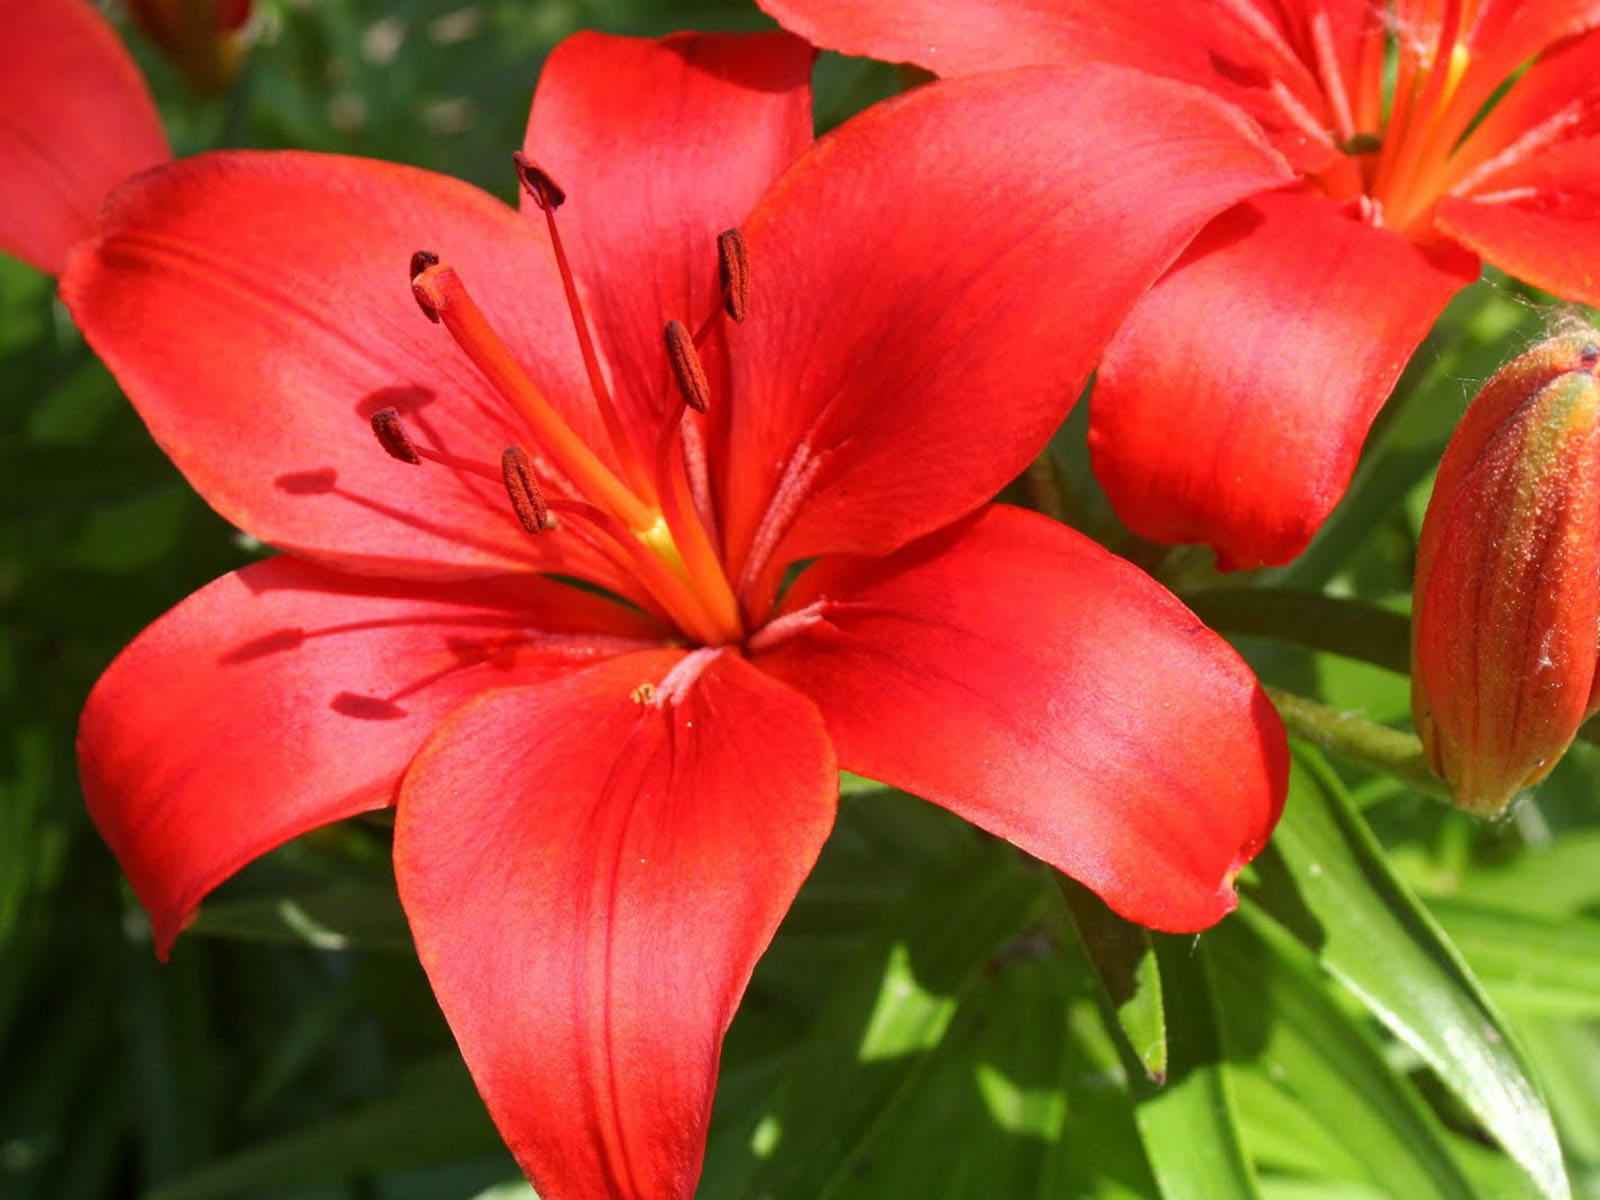 Lilies, HD Photo Collection for PC & Mac, Laptop, Tablet, Mobile Phone